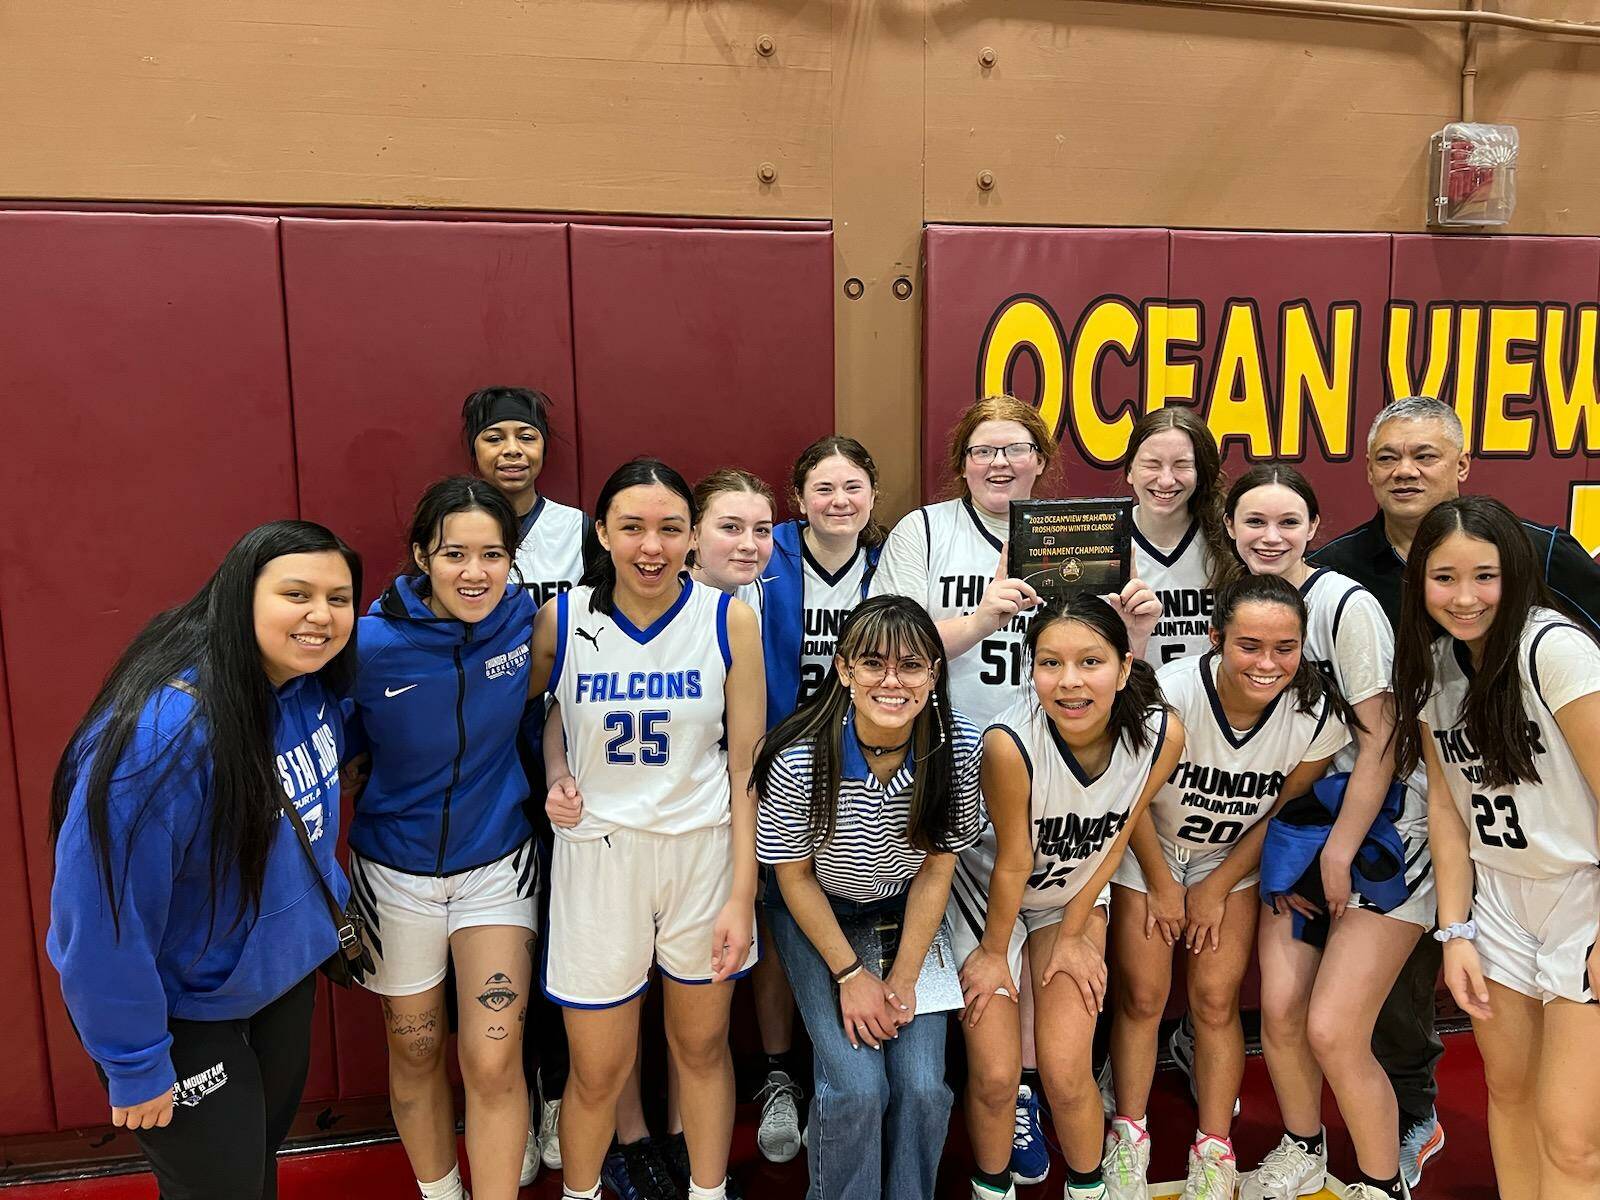 The Thunder Mountain High School junior varsity girls basketball team poses for a photo after winning their division the Ocean View Invitational. (Courtesy Photo)